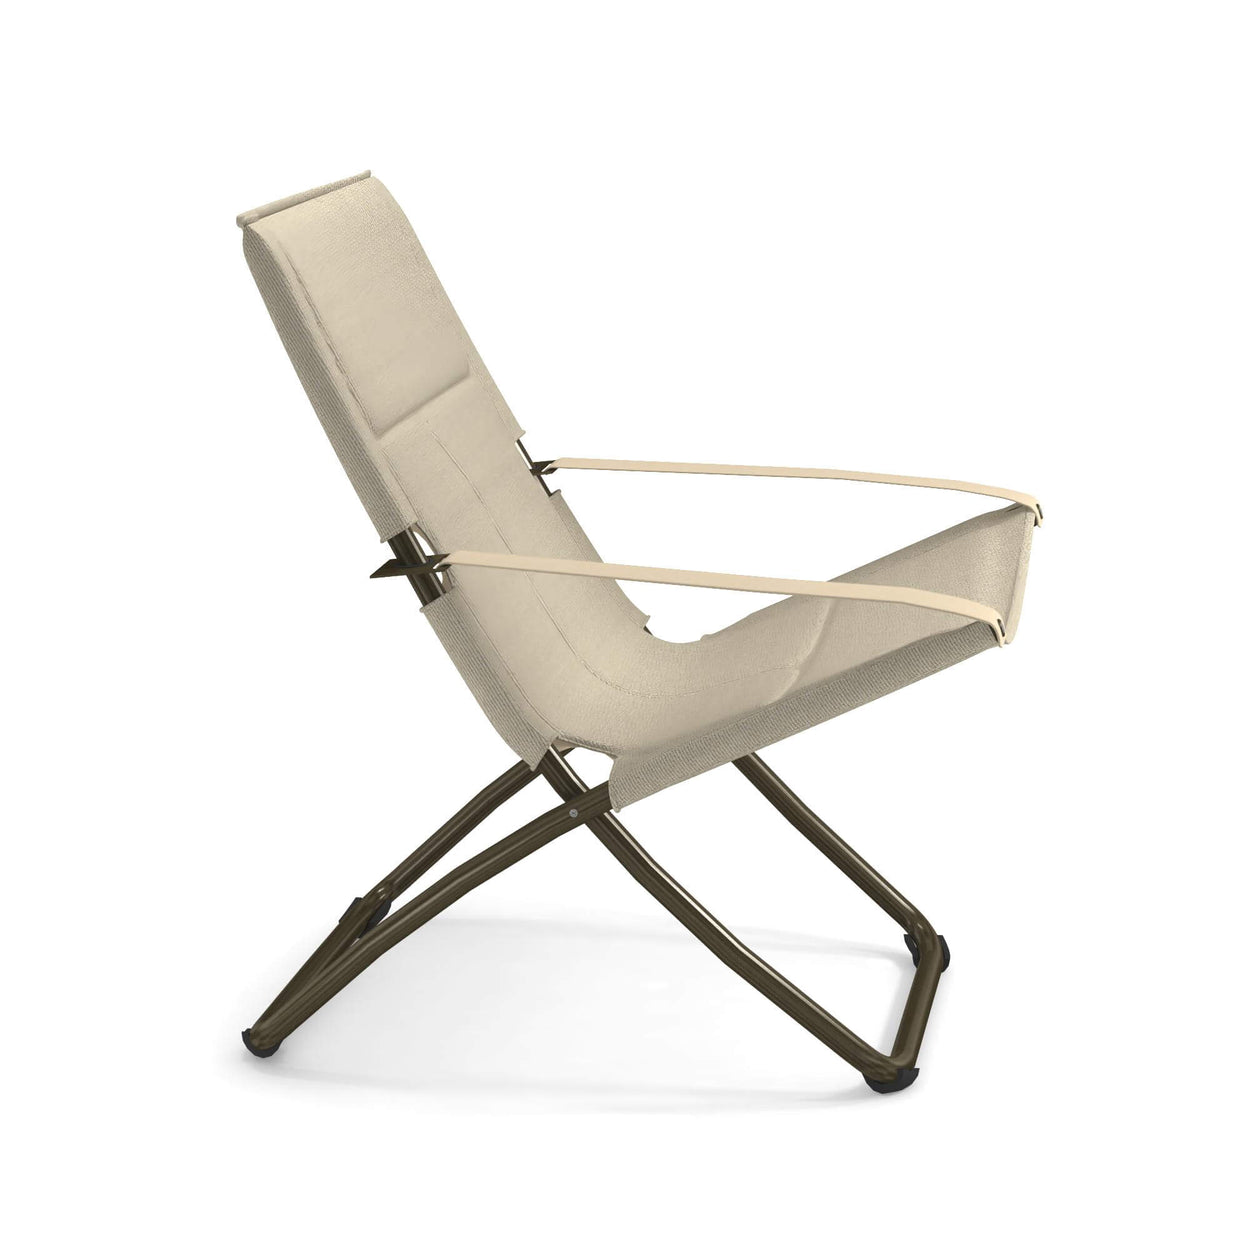 Snooze Cozy Deck chair